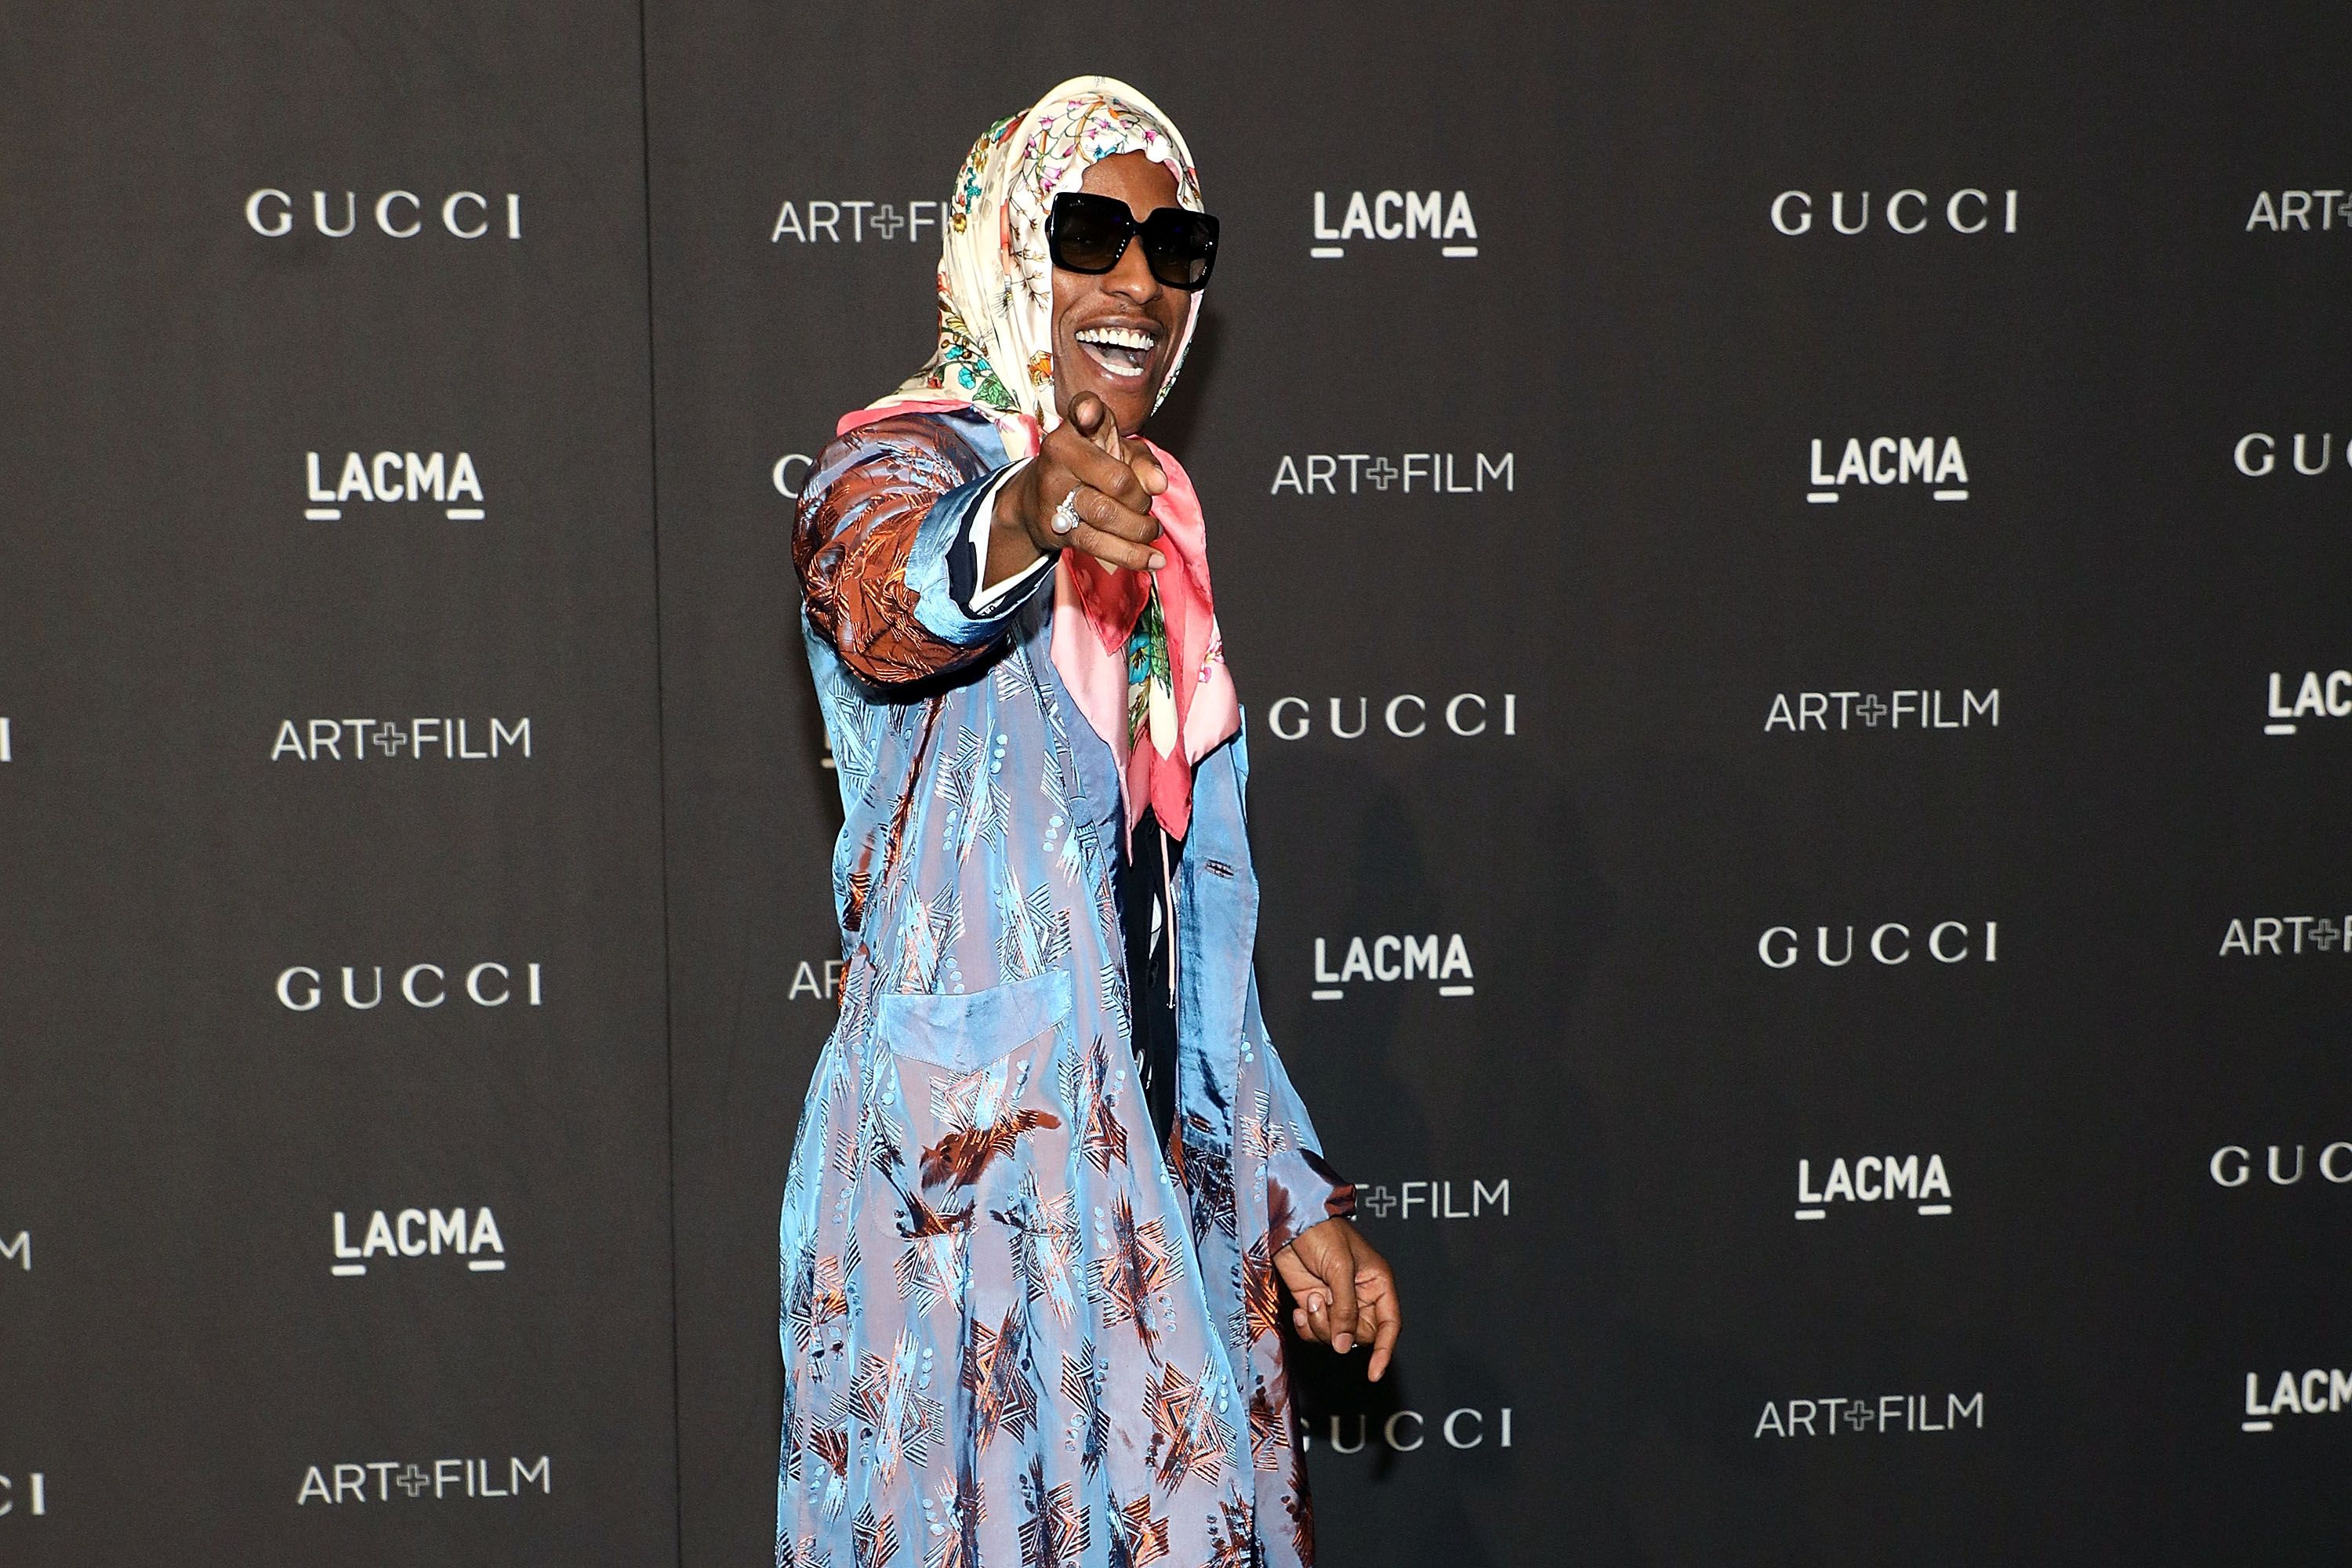 indsigelse for ikke at nævne myndighed A$AP Rocky Wore a Gucci Grandma Scarf, So Now I Need a Gucci Grandma Scarf